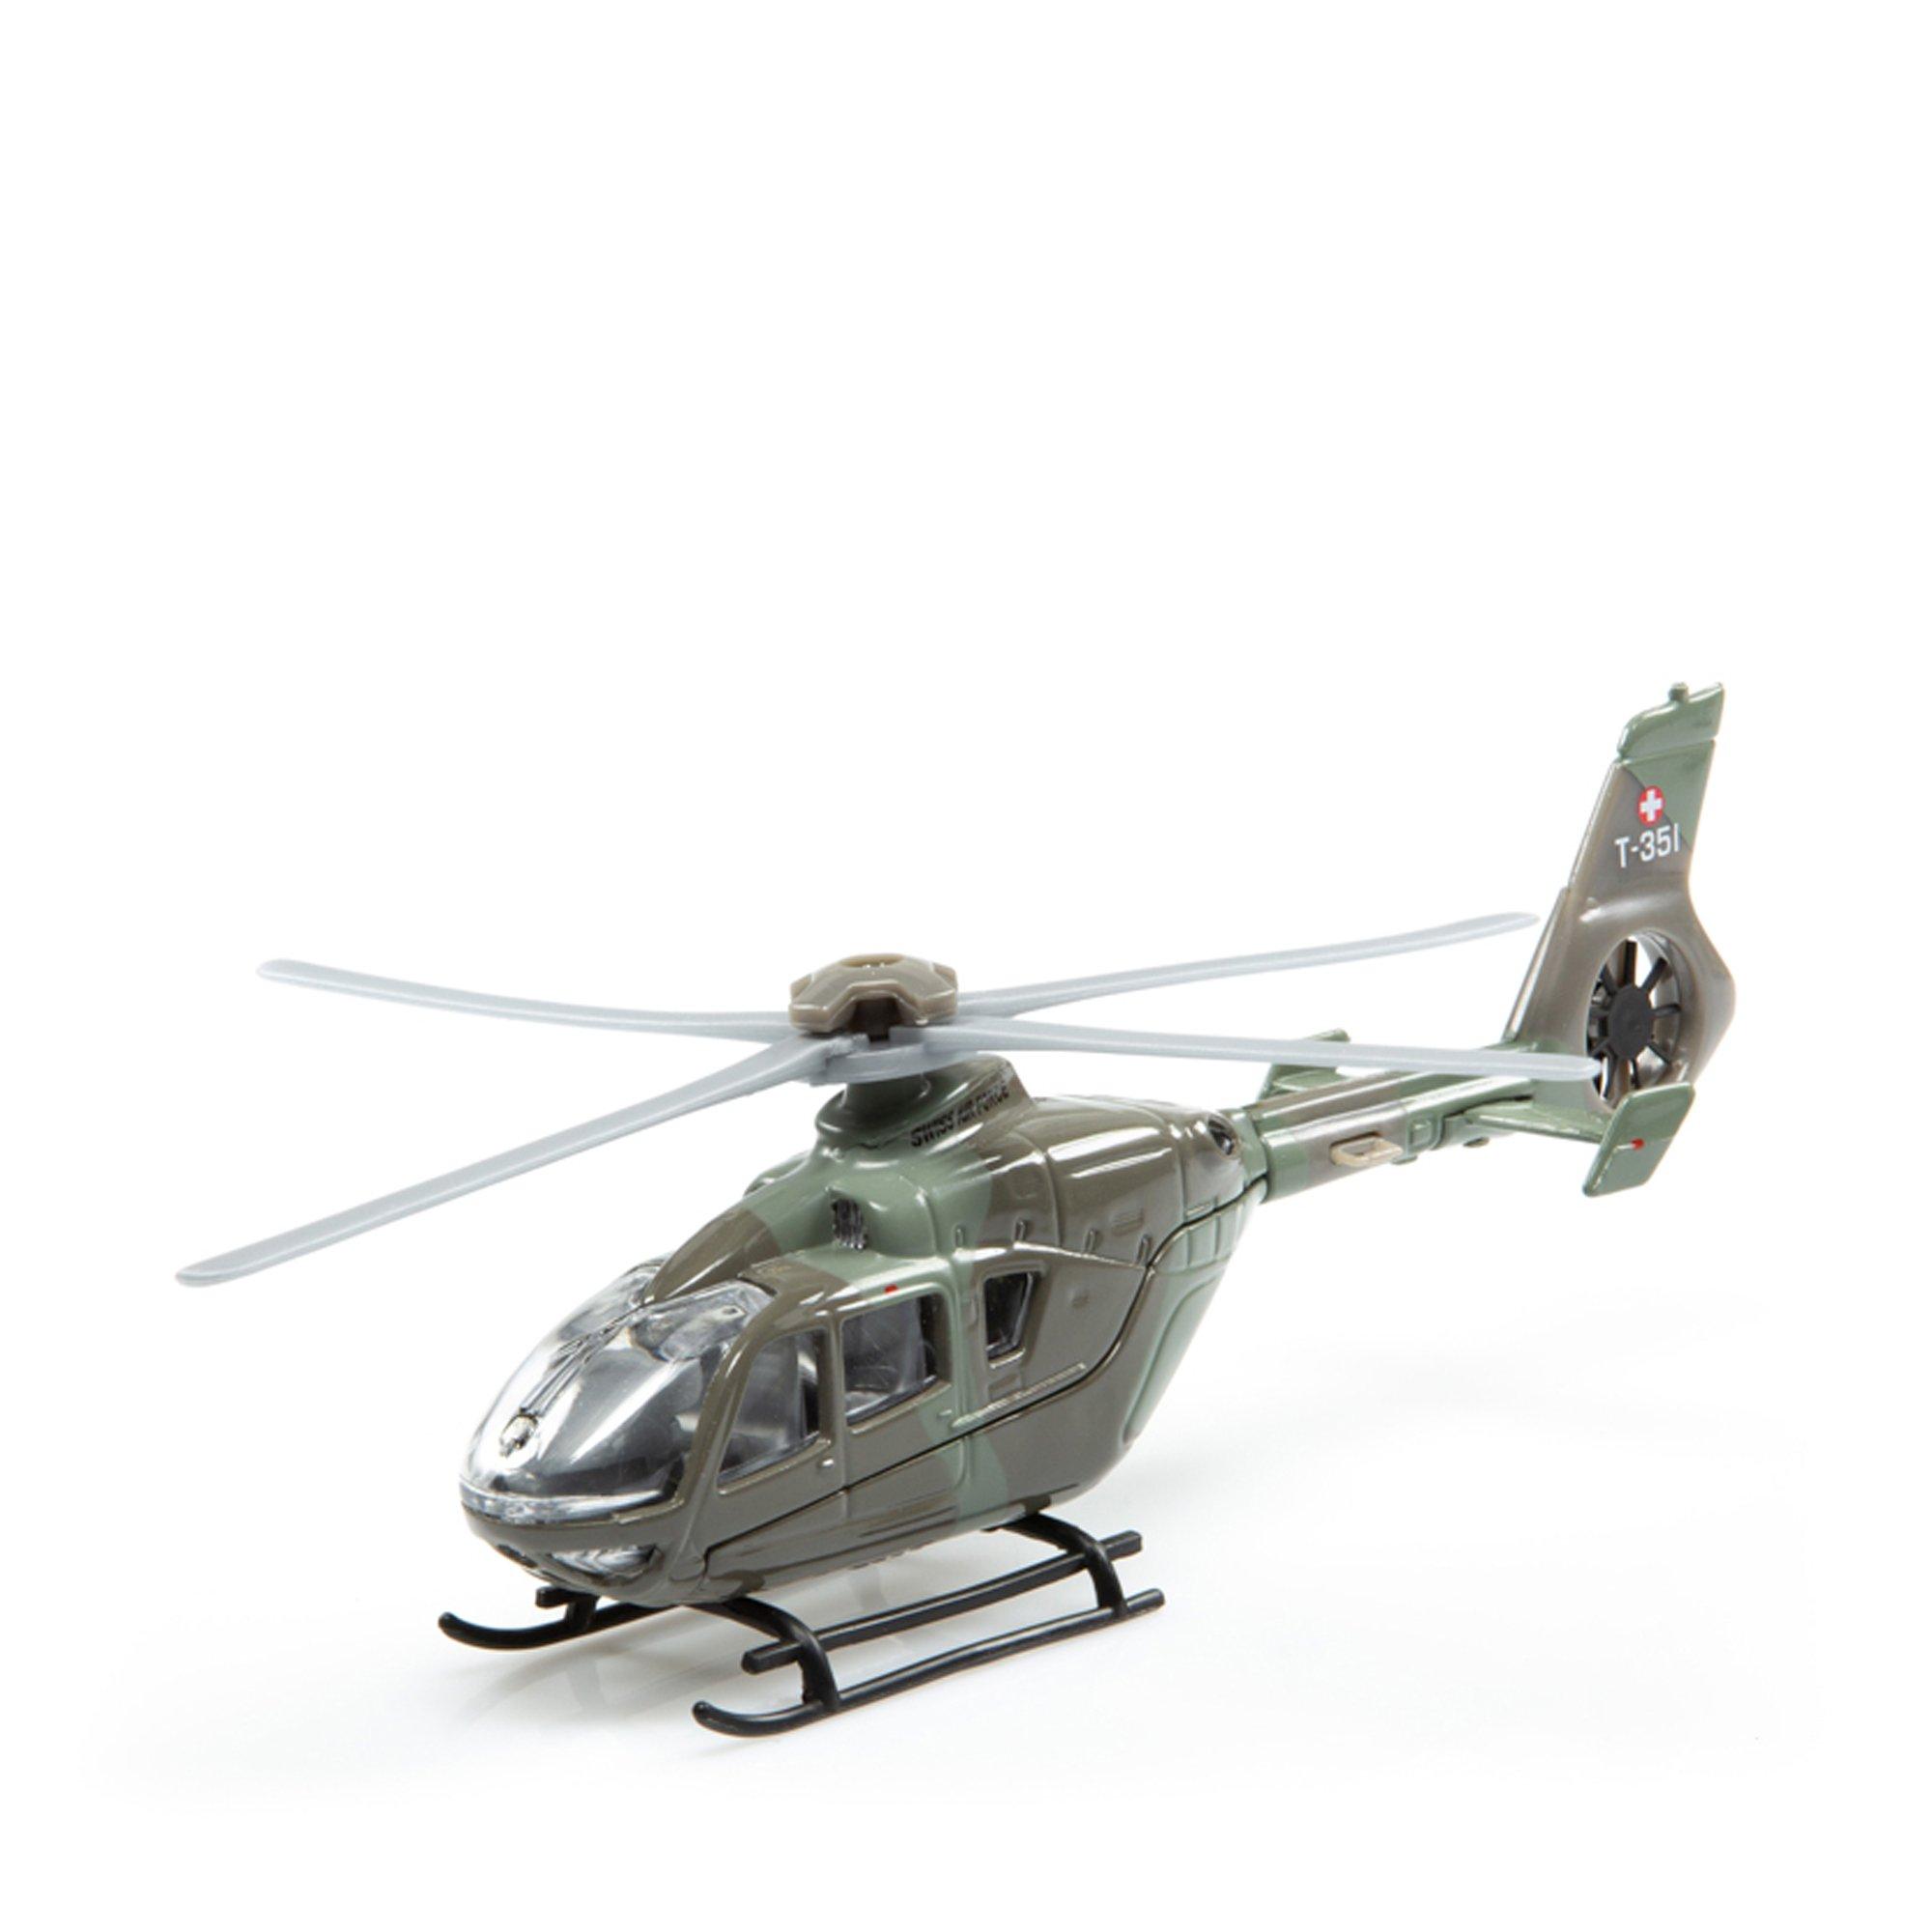 Image of ACE Toy EC-635 Swiss Air Force Helikopter Mini